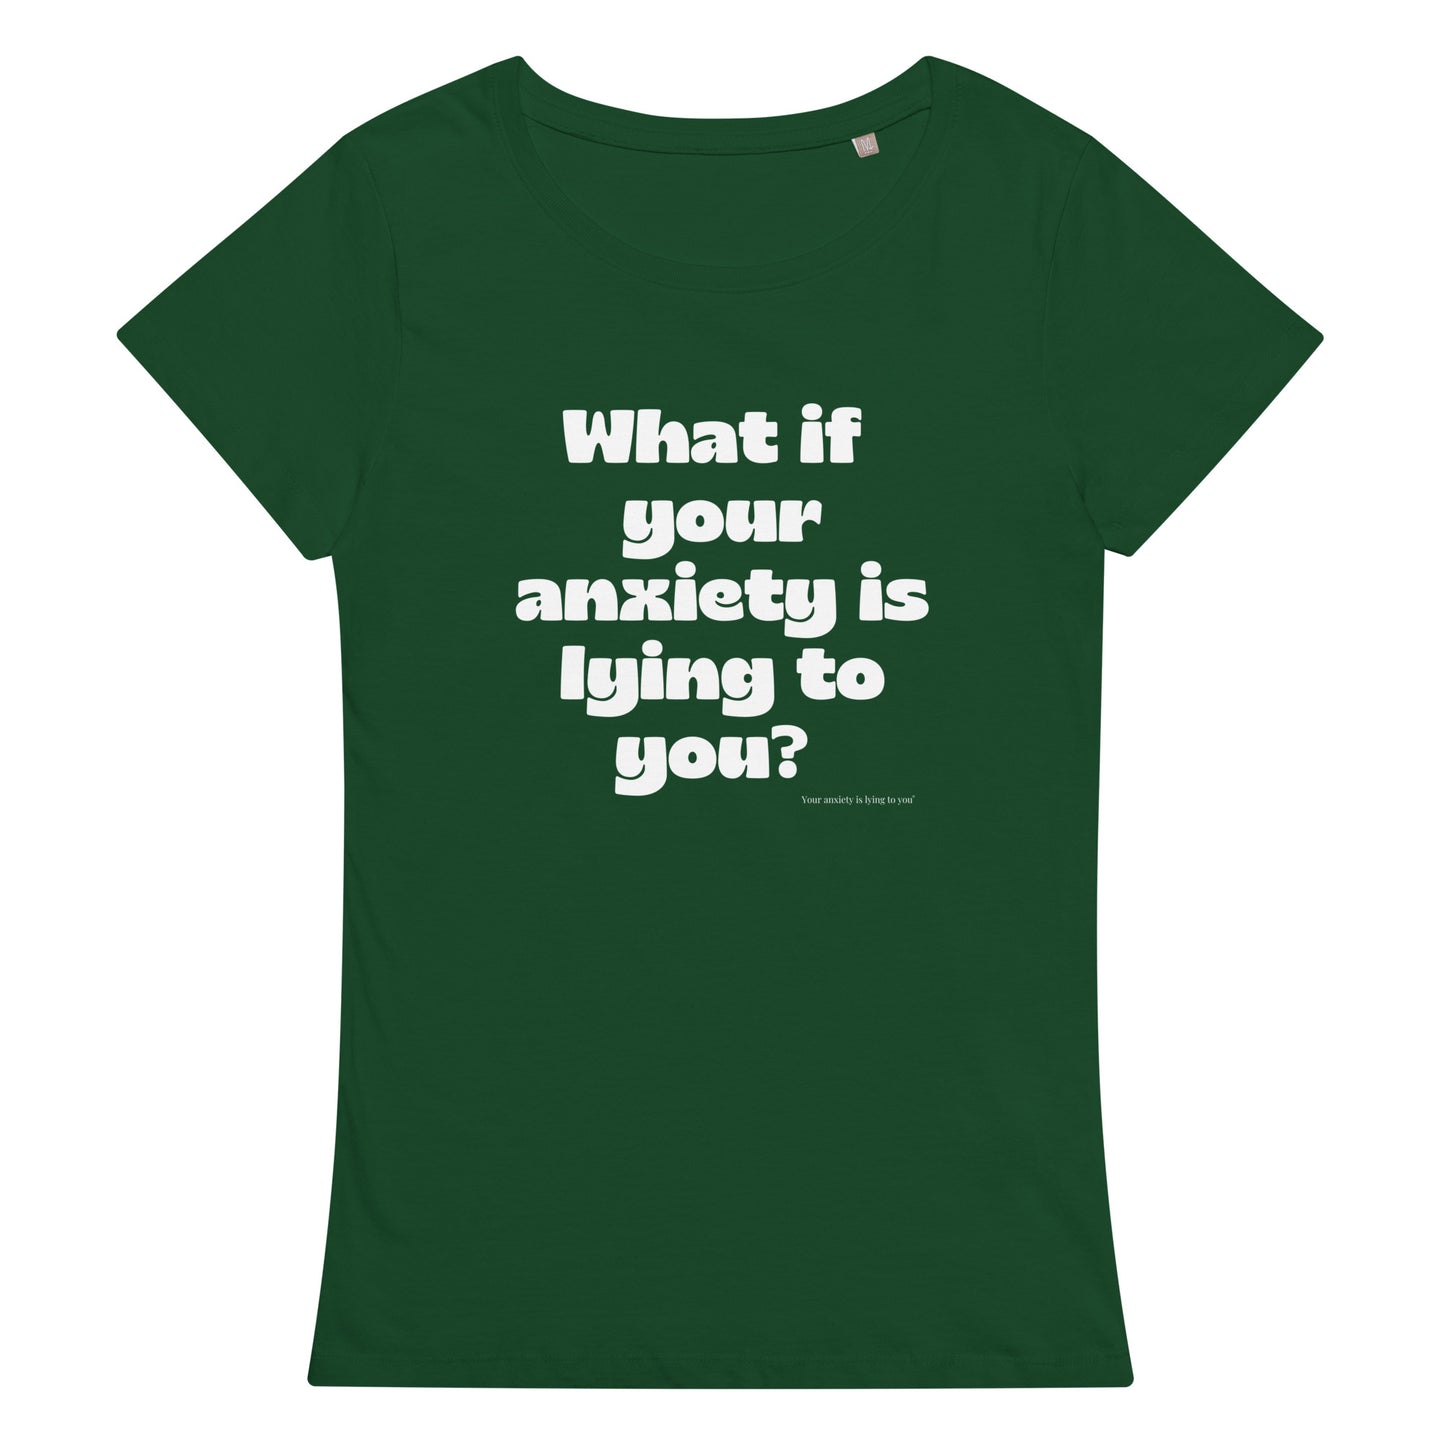 What if your anxiety is lying to you? Women’s basic organic t-shirt